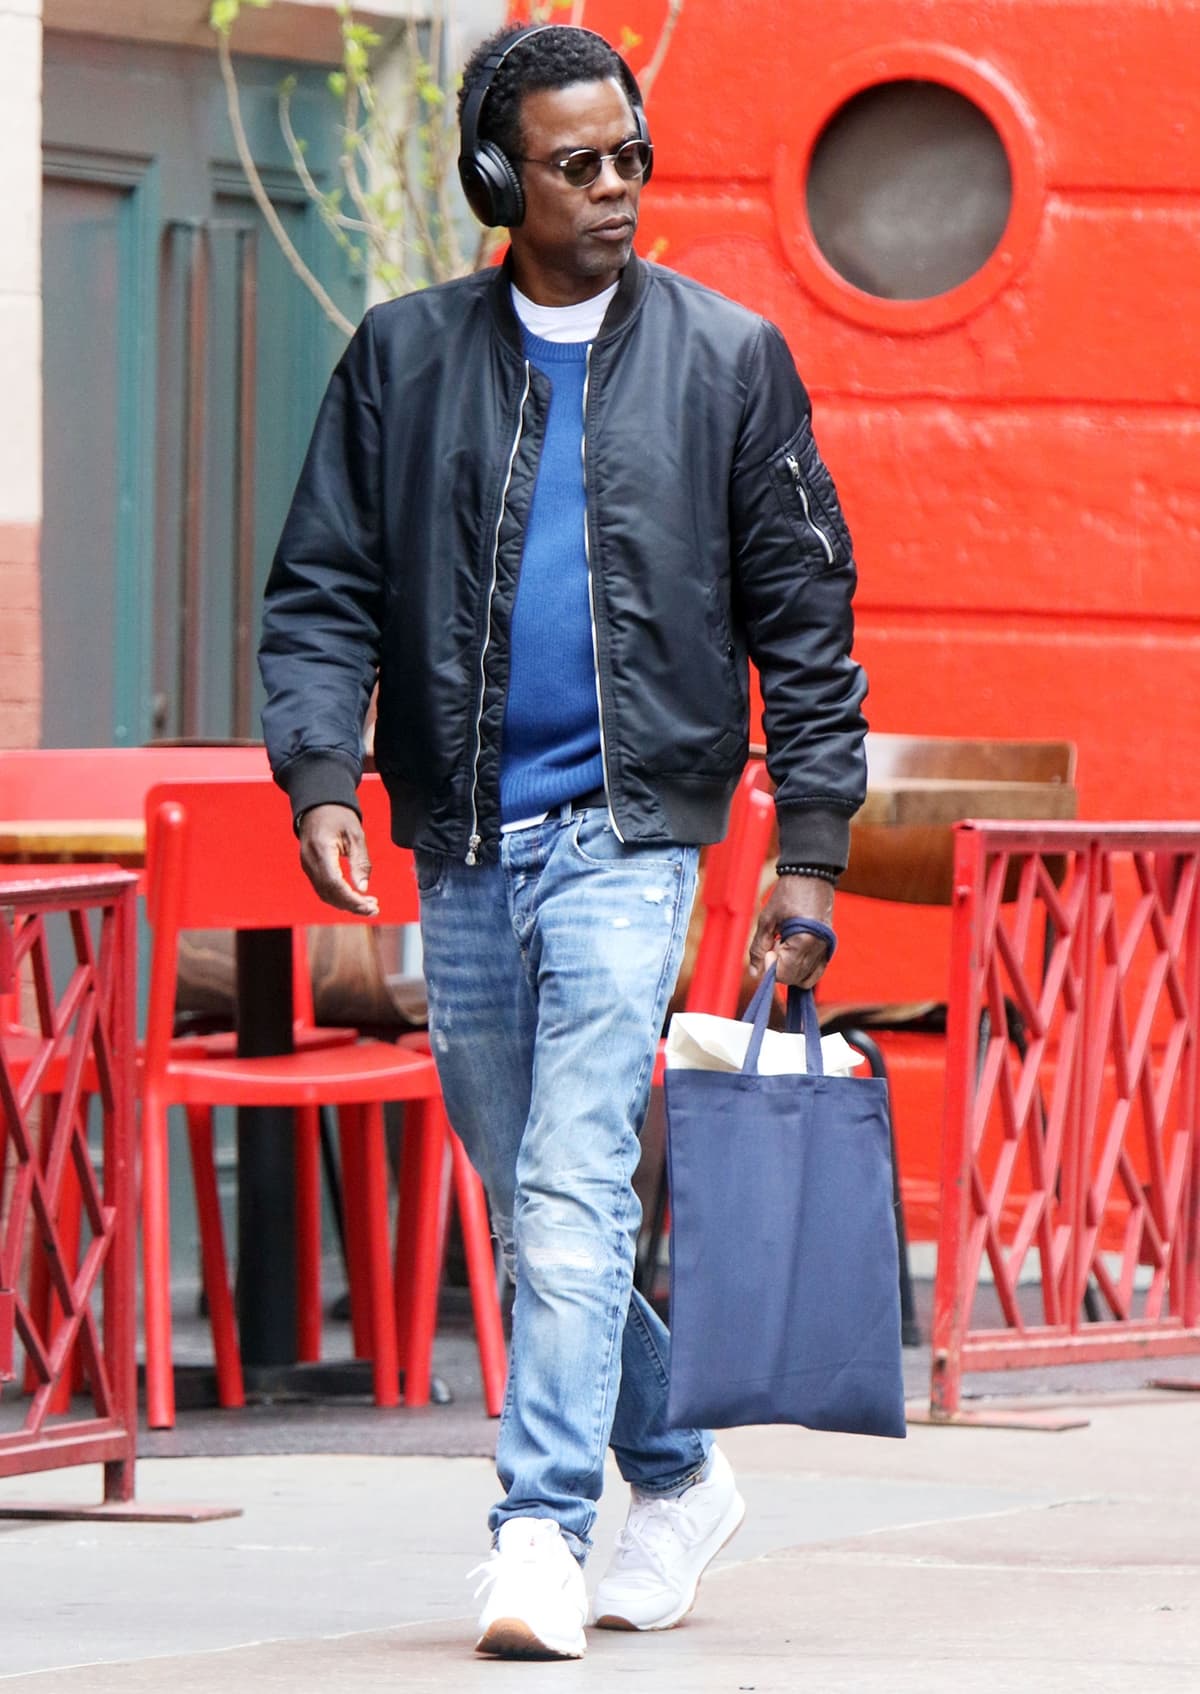 Chris Rock in jeans and white sneakers is seen listening to music